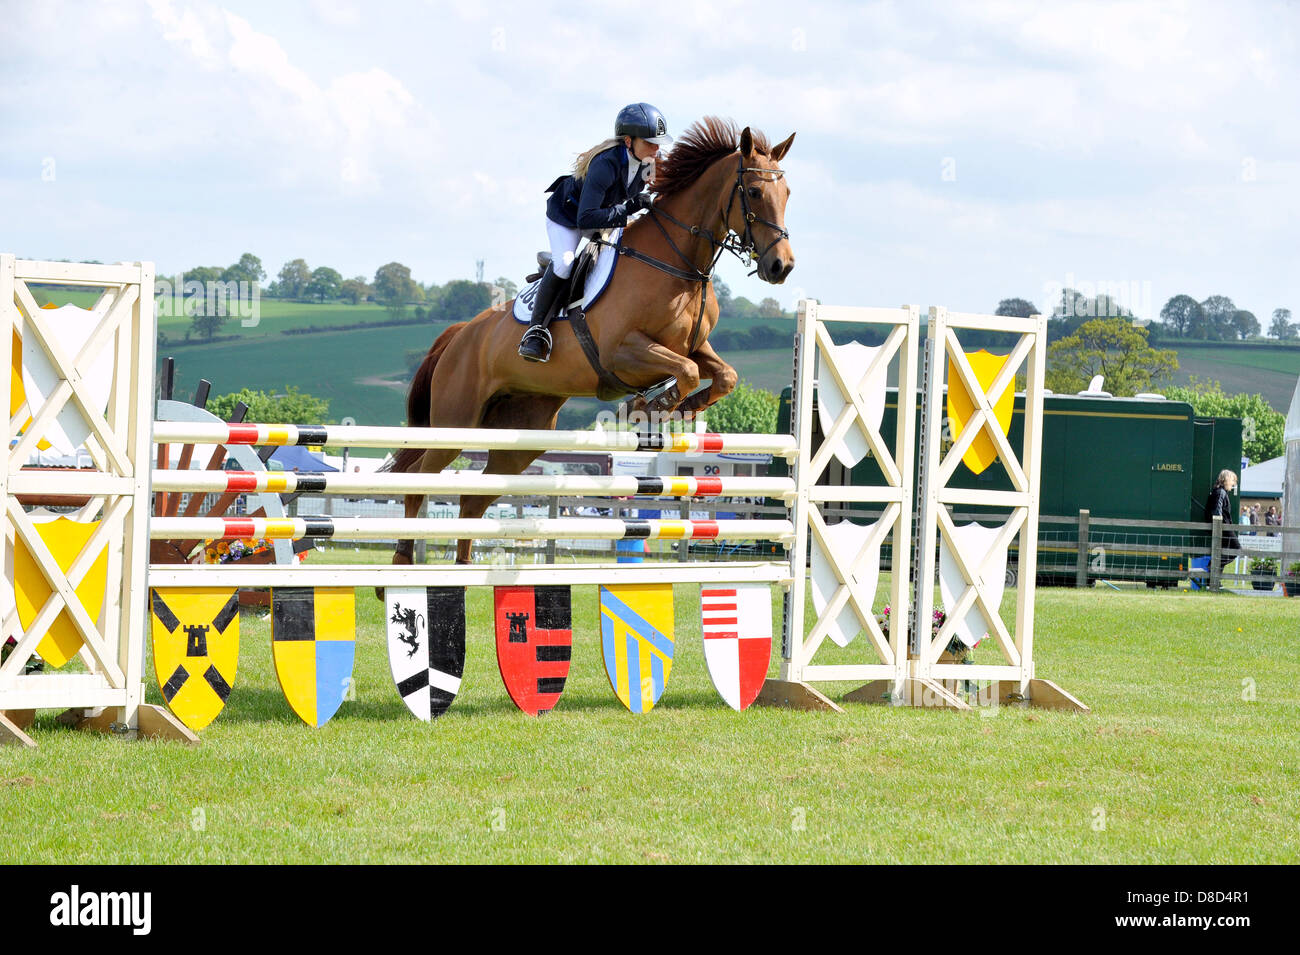 REDBOURN, UK. 25th May 2013. Show jumping at the Hertfordshire County Show. Lucinda Turner competes in the Foxhunter 1.20m Open class. Stock Photo